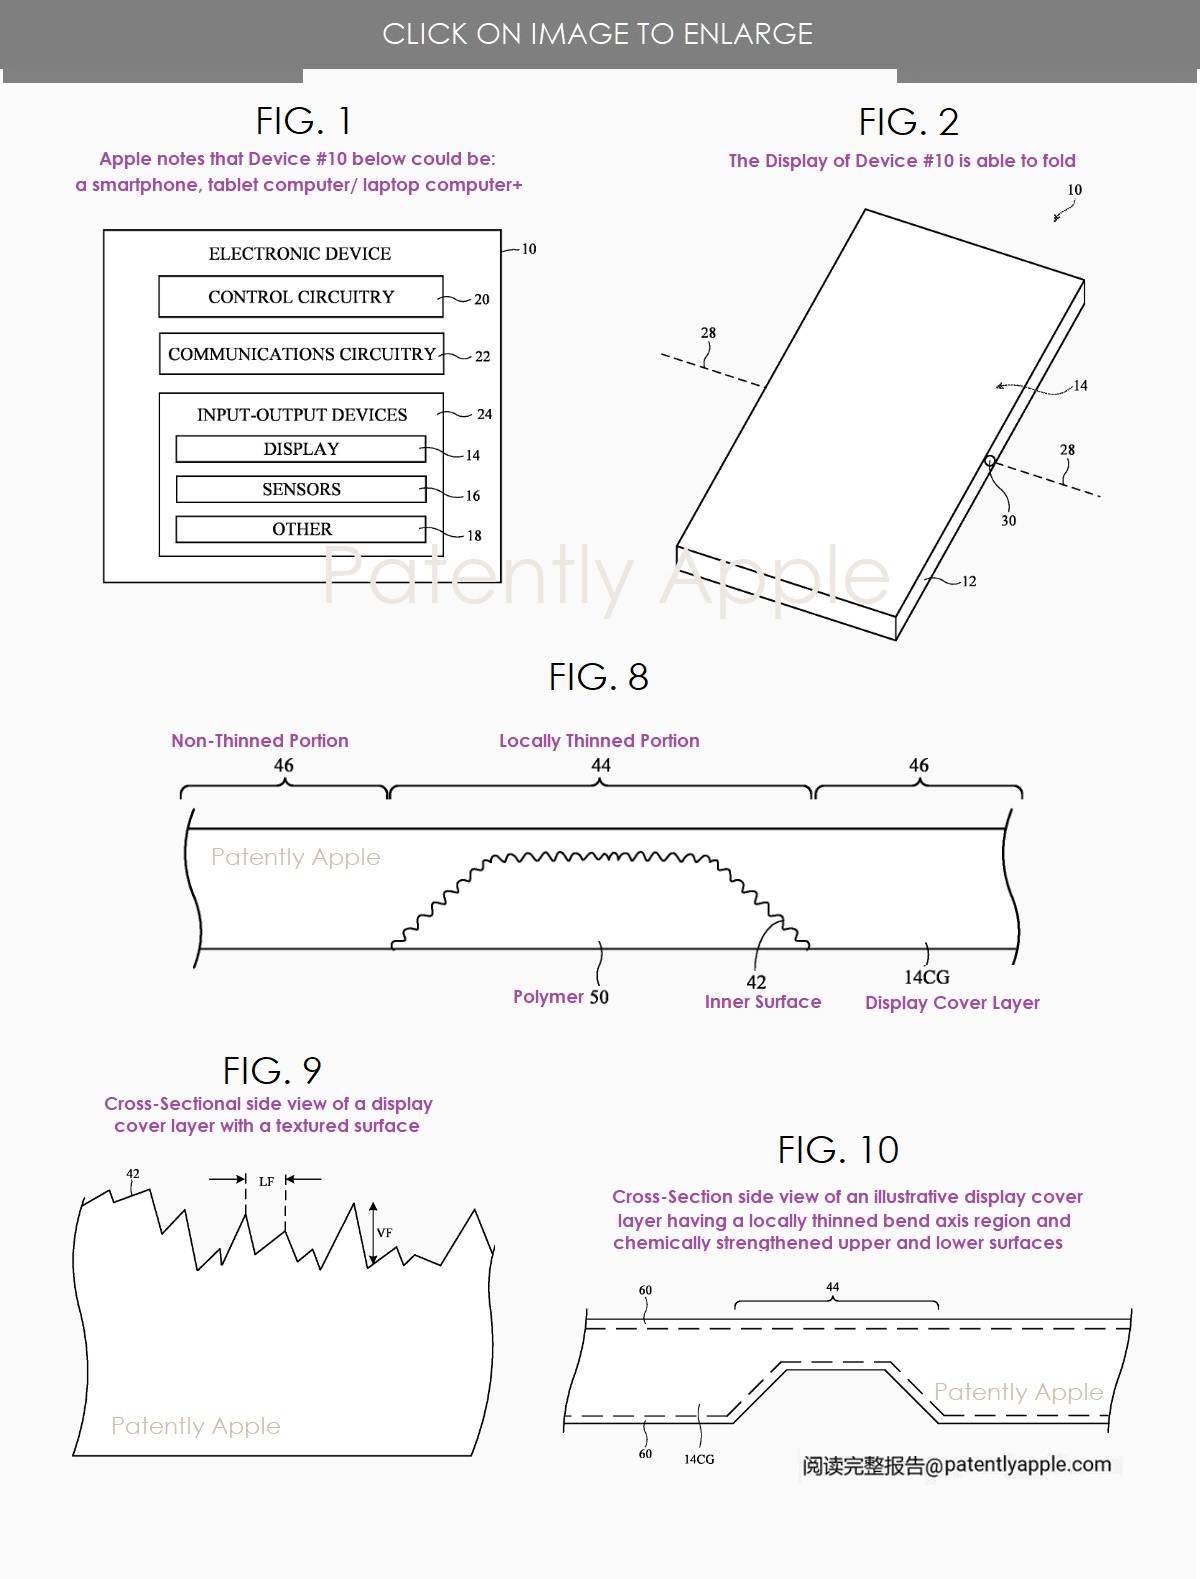 Recently Published Apple Patent